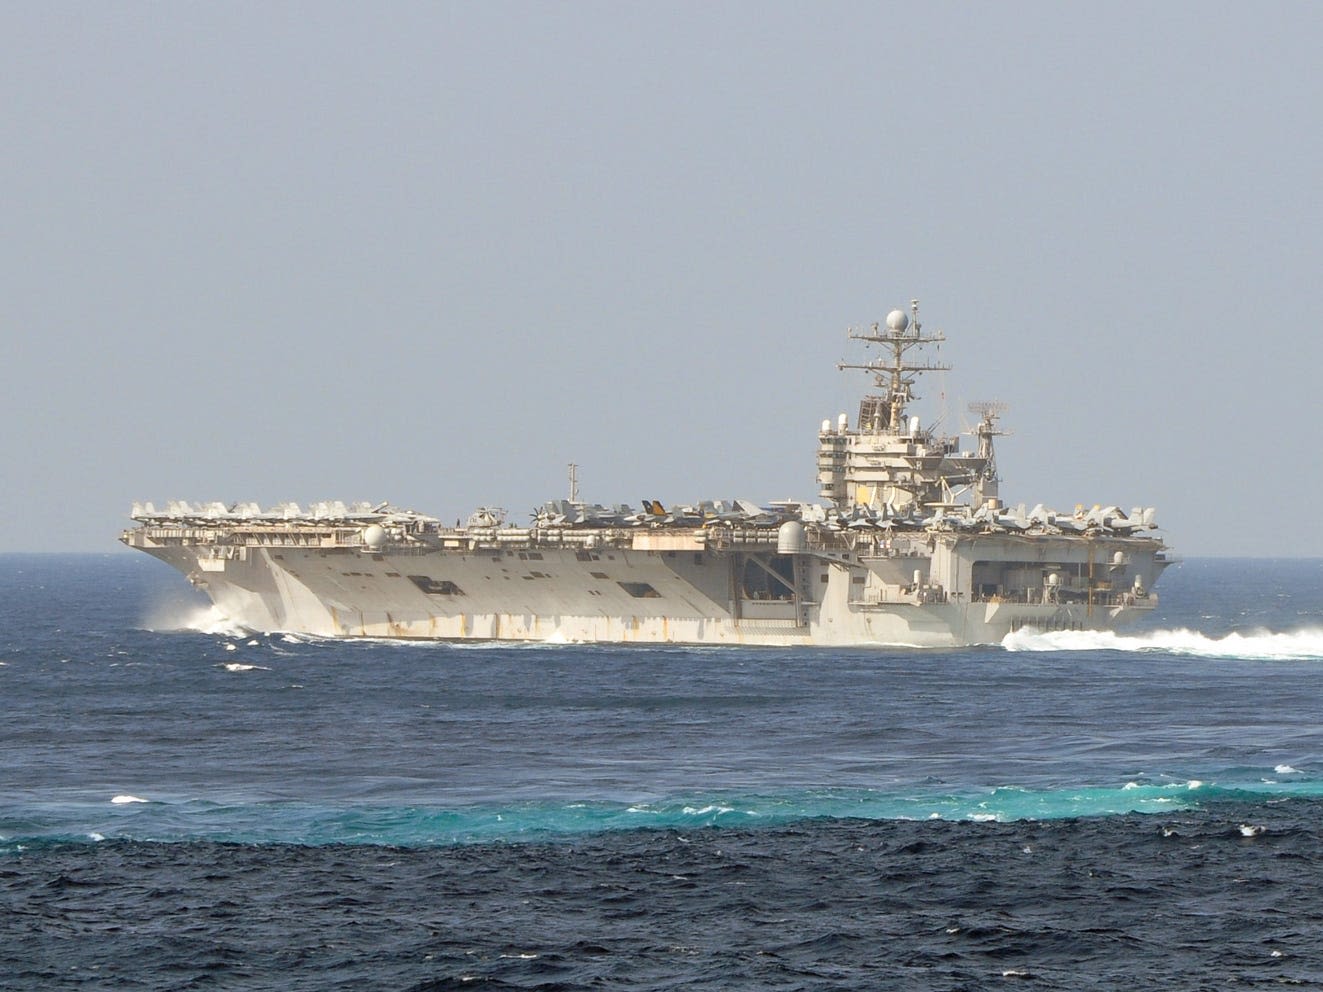 The US Navy is on its fourth aircraft carrier as its warships react to fighting in the Middle East